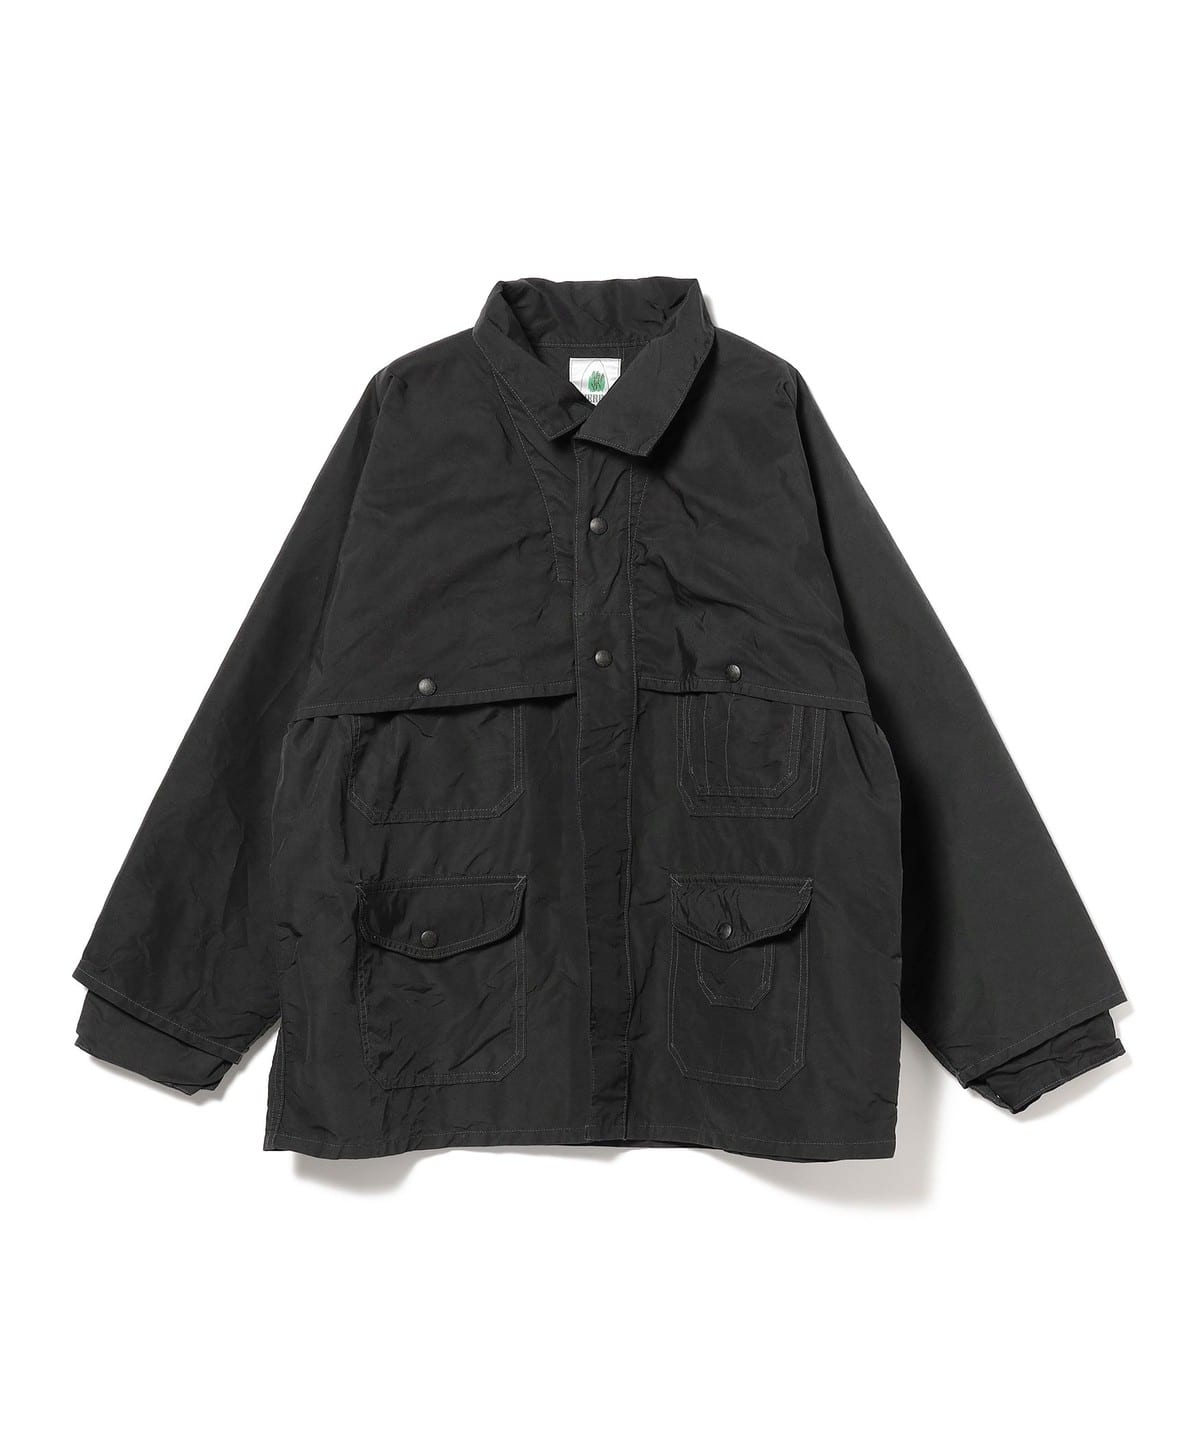 BEAMS PLUS（ビームス プラス）POST OVERALLS / POST Logger Special 